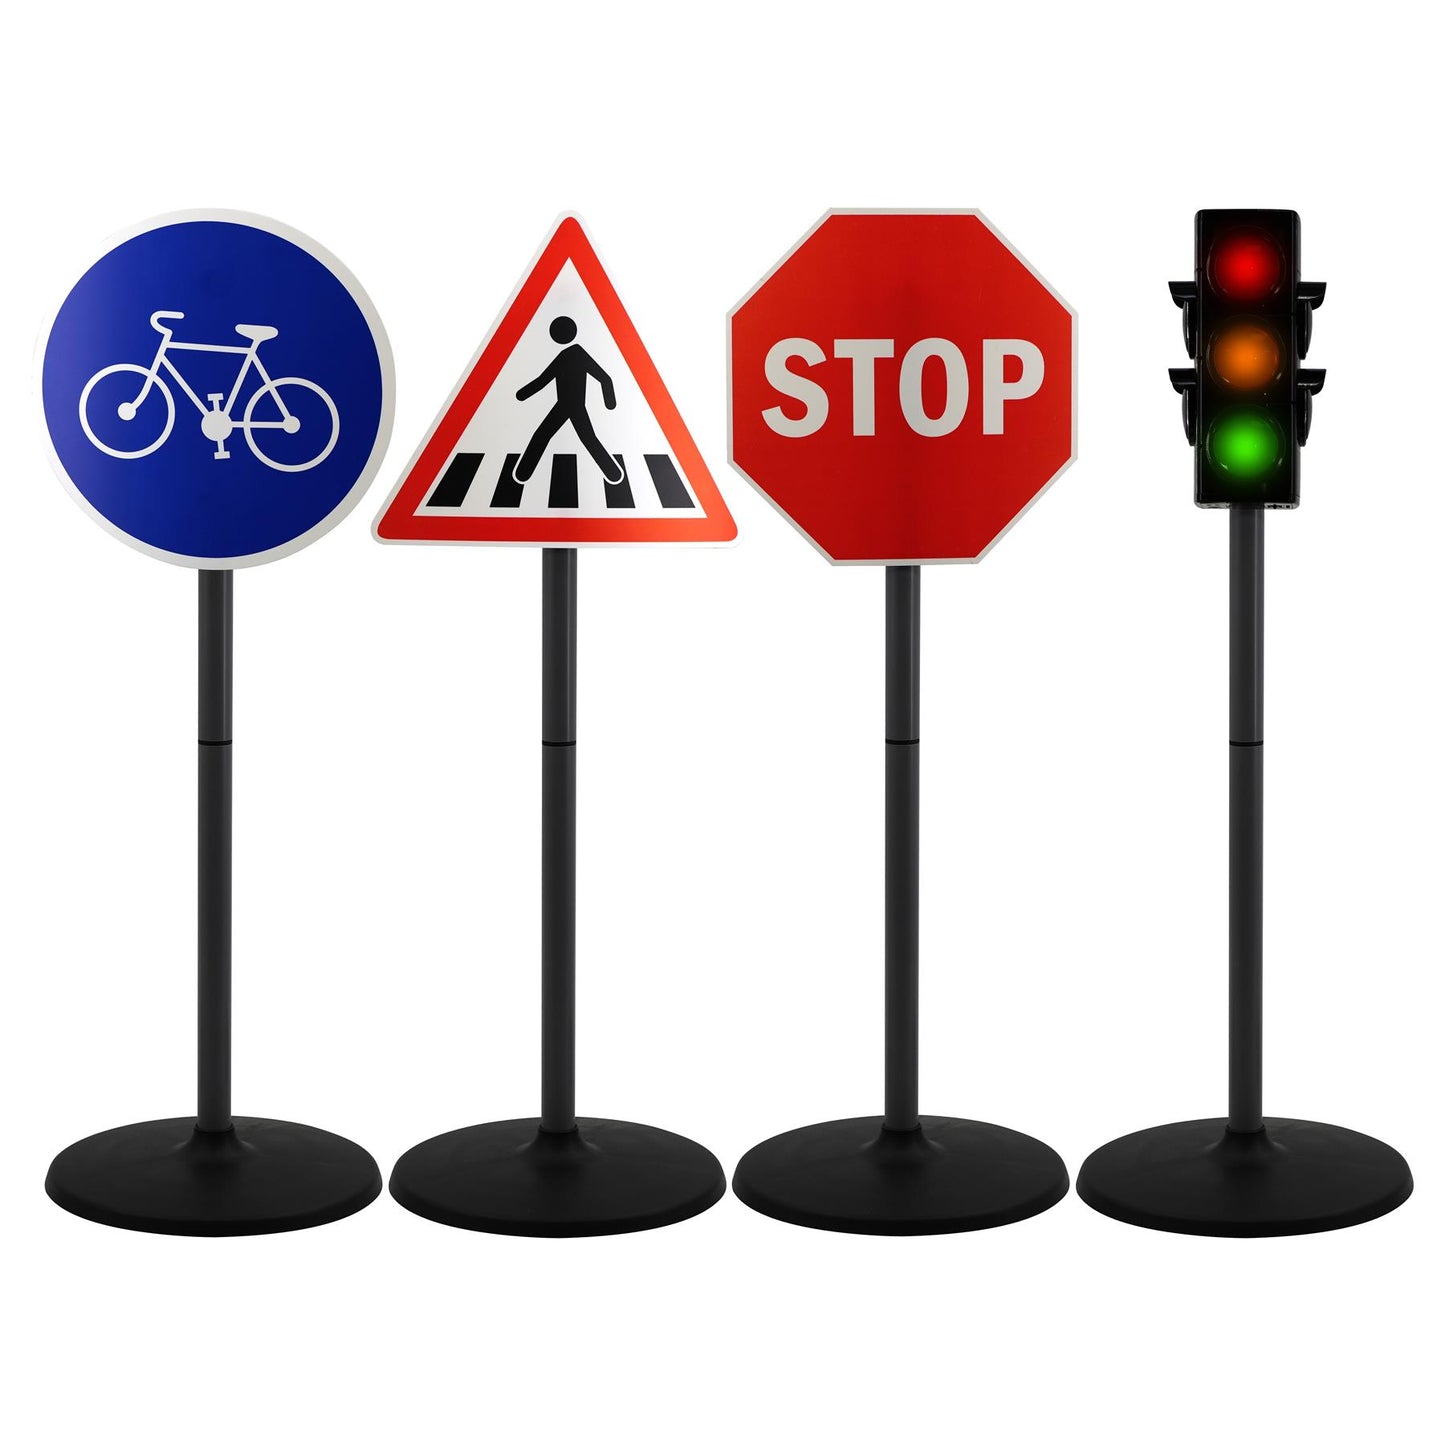 Set of Road Signs and Traffic Lights by The Magic Toy Shop - UKBuyZone